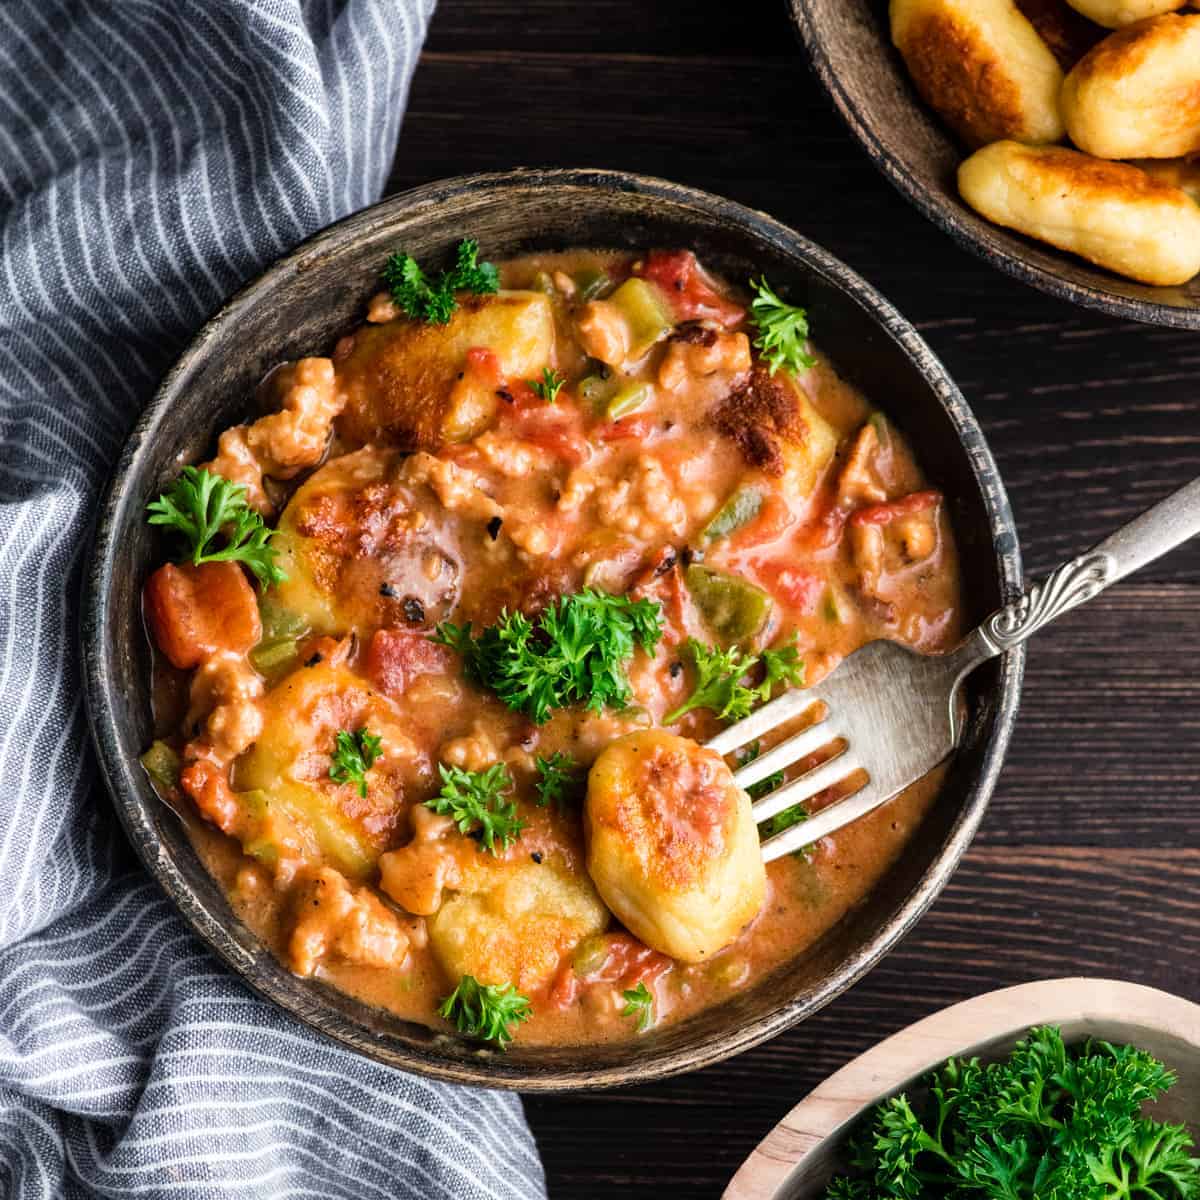 A delicious bowl of sausage stew with potatoes, topped with fresh parsley.